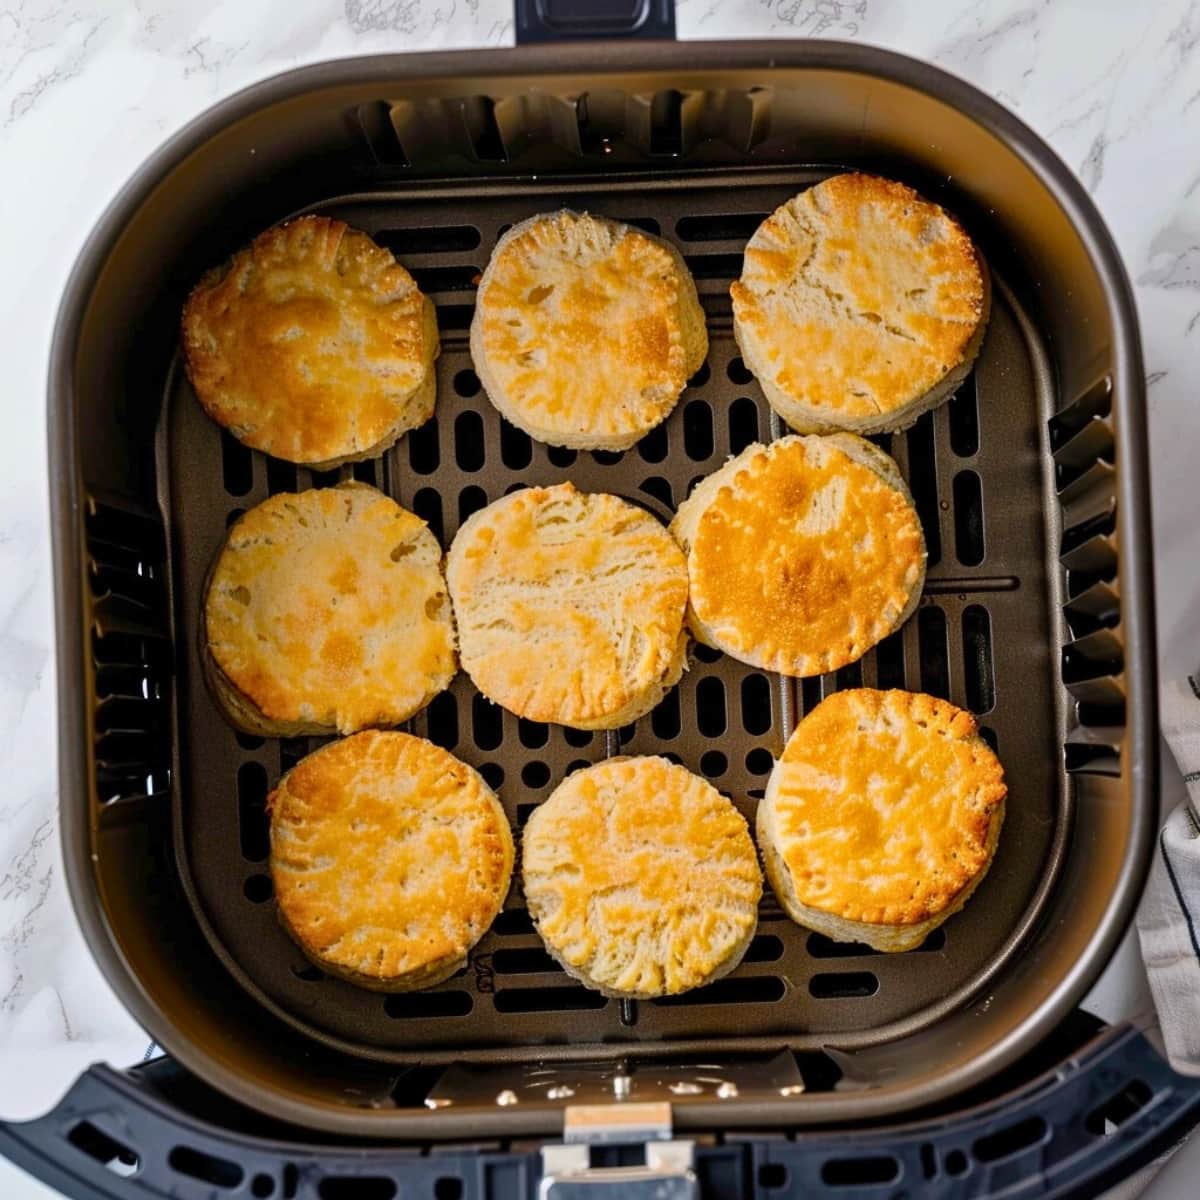 Biscuits inside an air fryer.